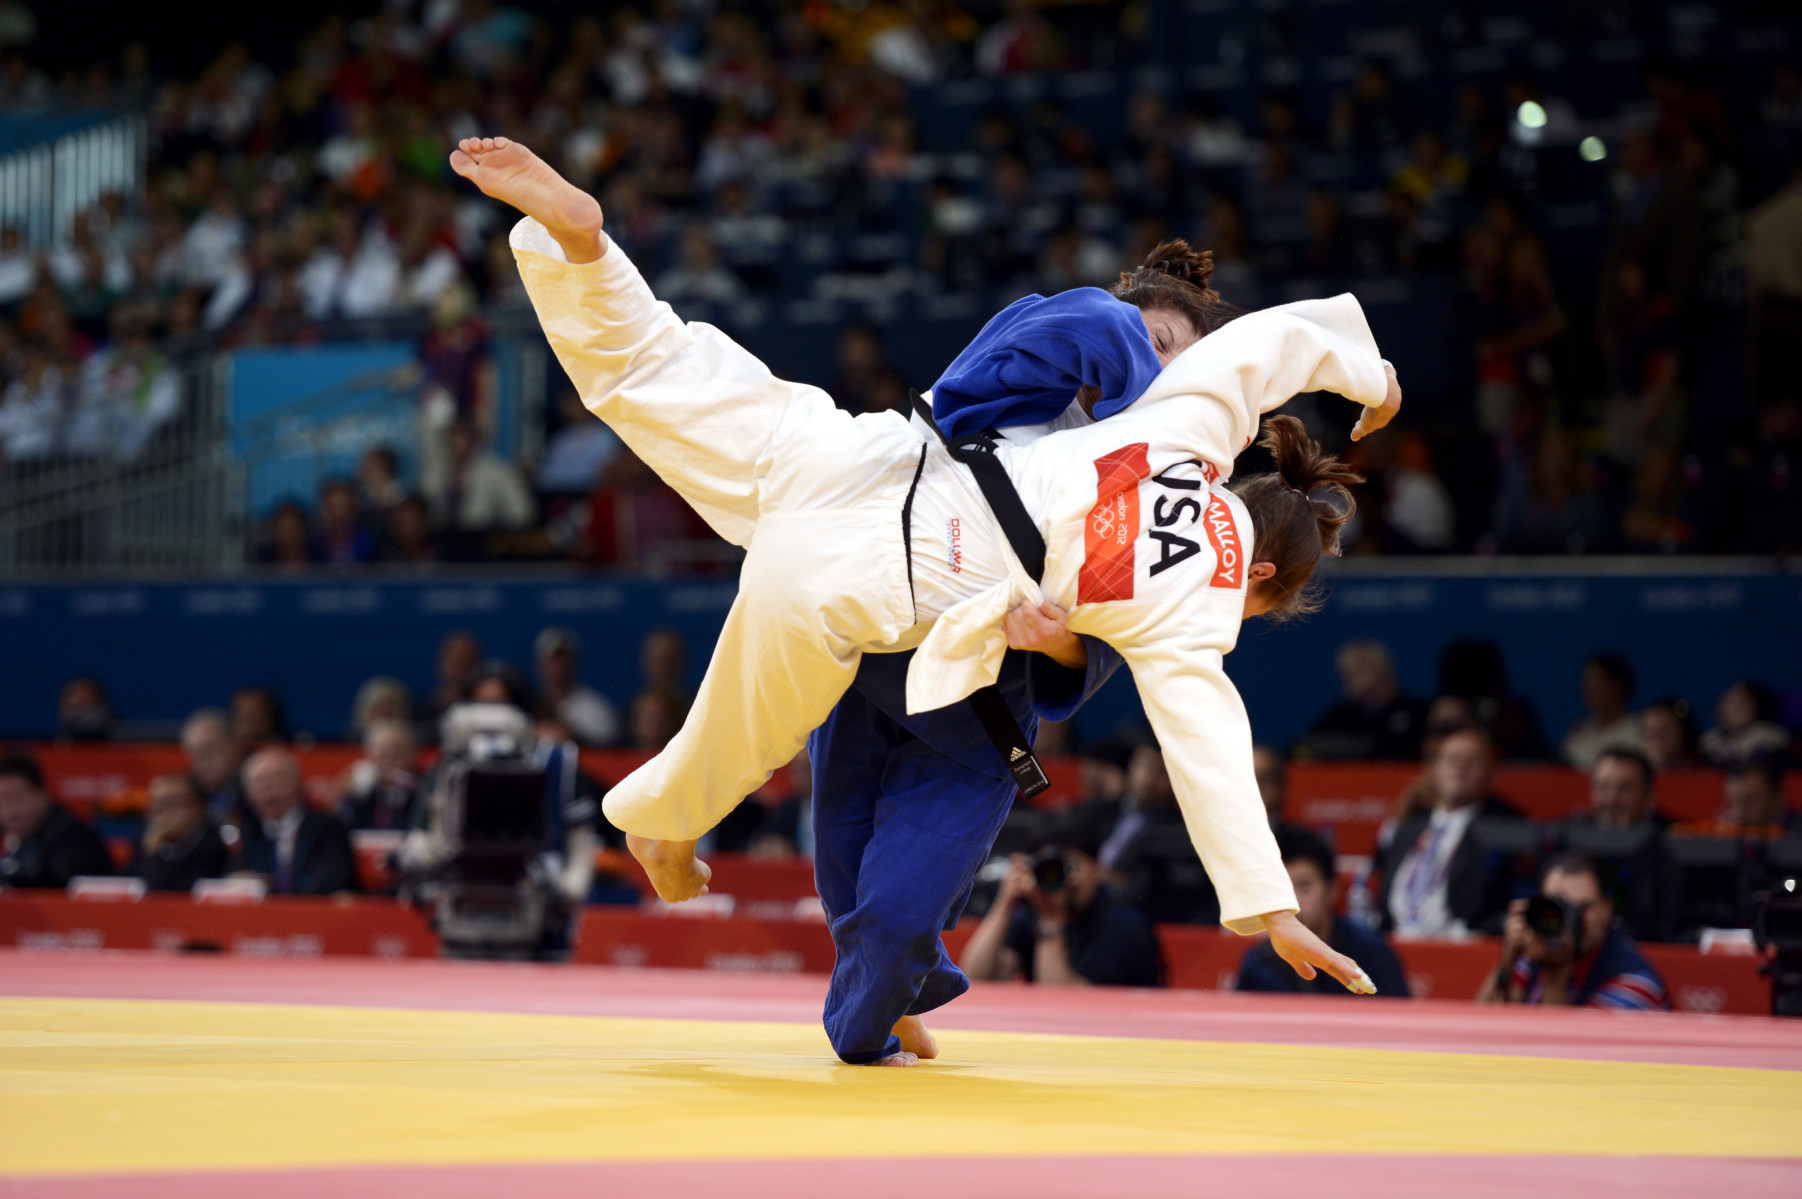 Corina Caprioriu of Romania, the eventual gold medalist, wearing blue, takes down Marti Malloy of the United States during the women's 57kg Judo competition.   Malloy won the bronze medal which she shared with Automne Pavia of France. : London Olympics : Photography by Adam Stoltman: Sports Photography, The Arts, Portraiture, Travel, Photojournalism and Fine Art in New York